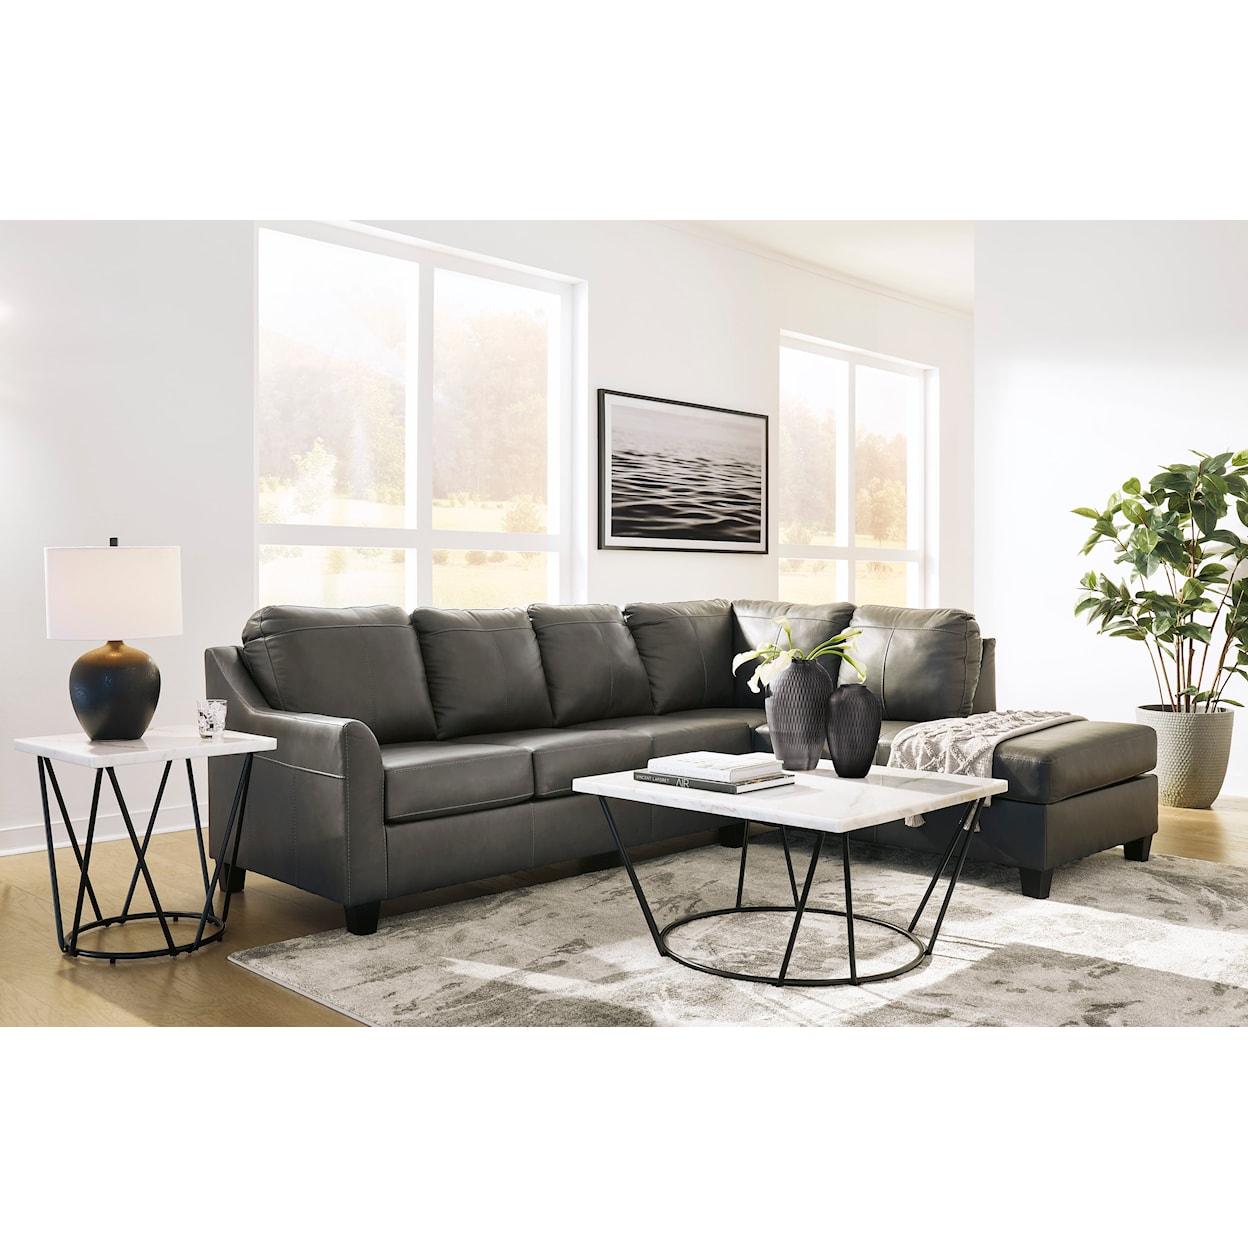 Signature Design by Ashley Valderno 2-Piece Sectional with Chaise